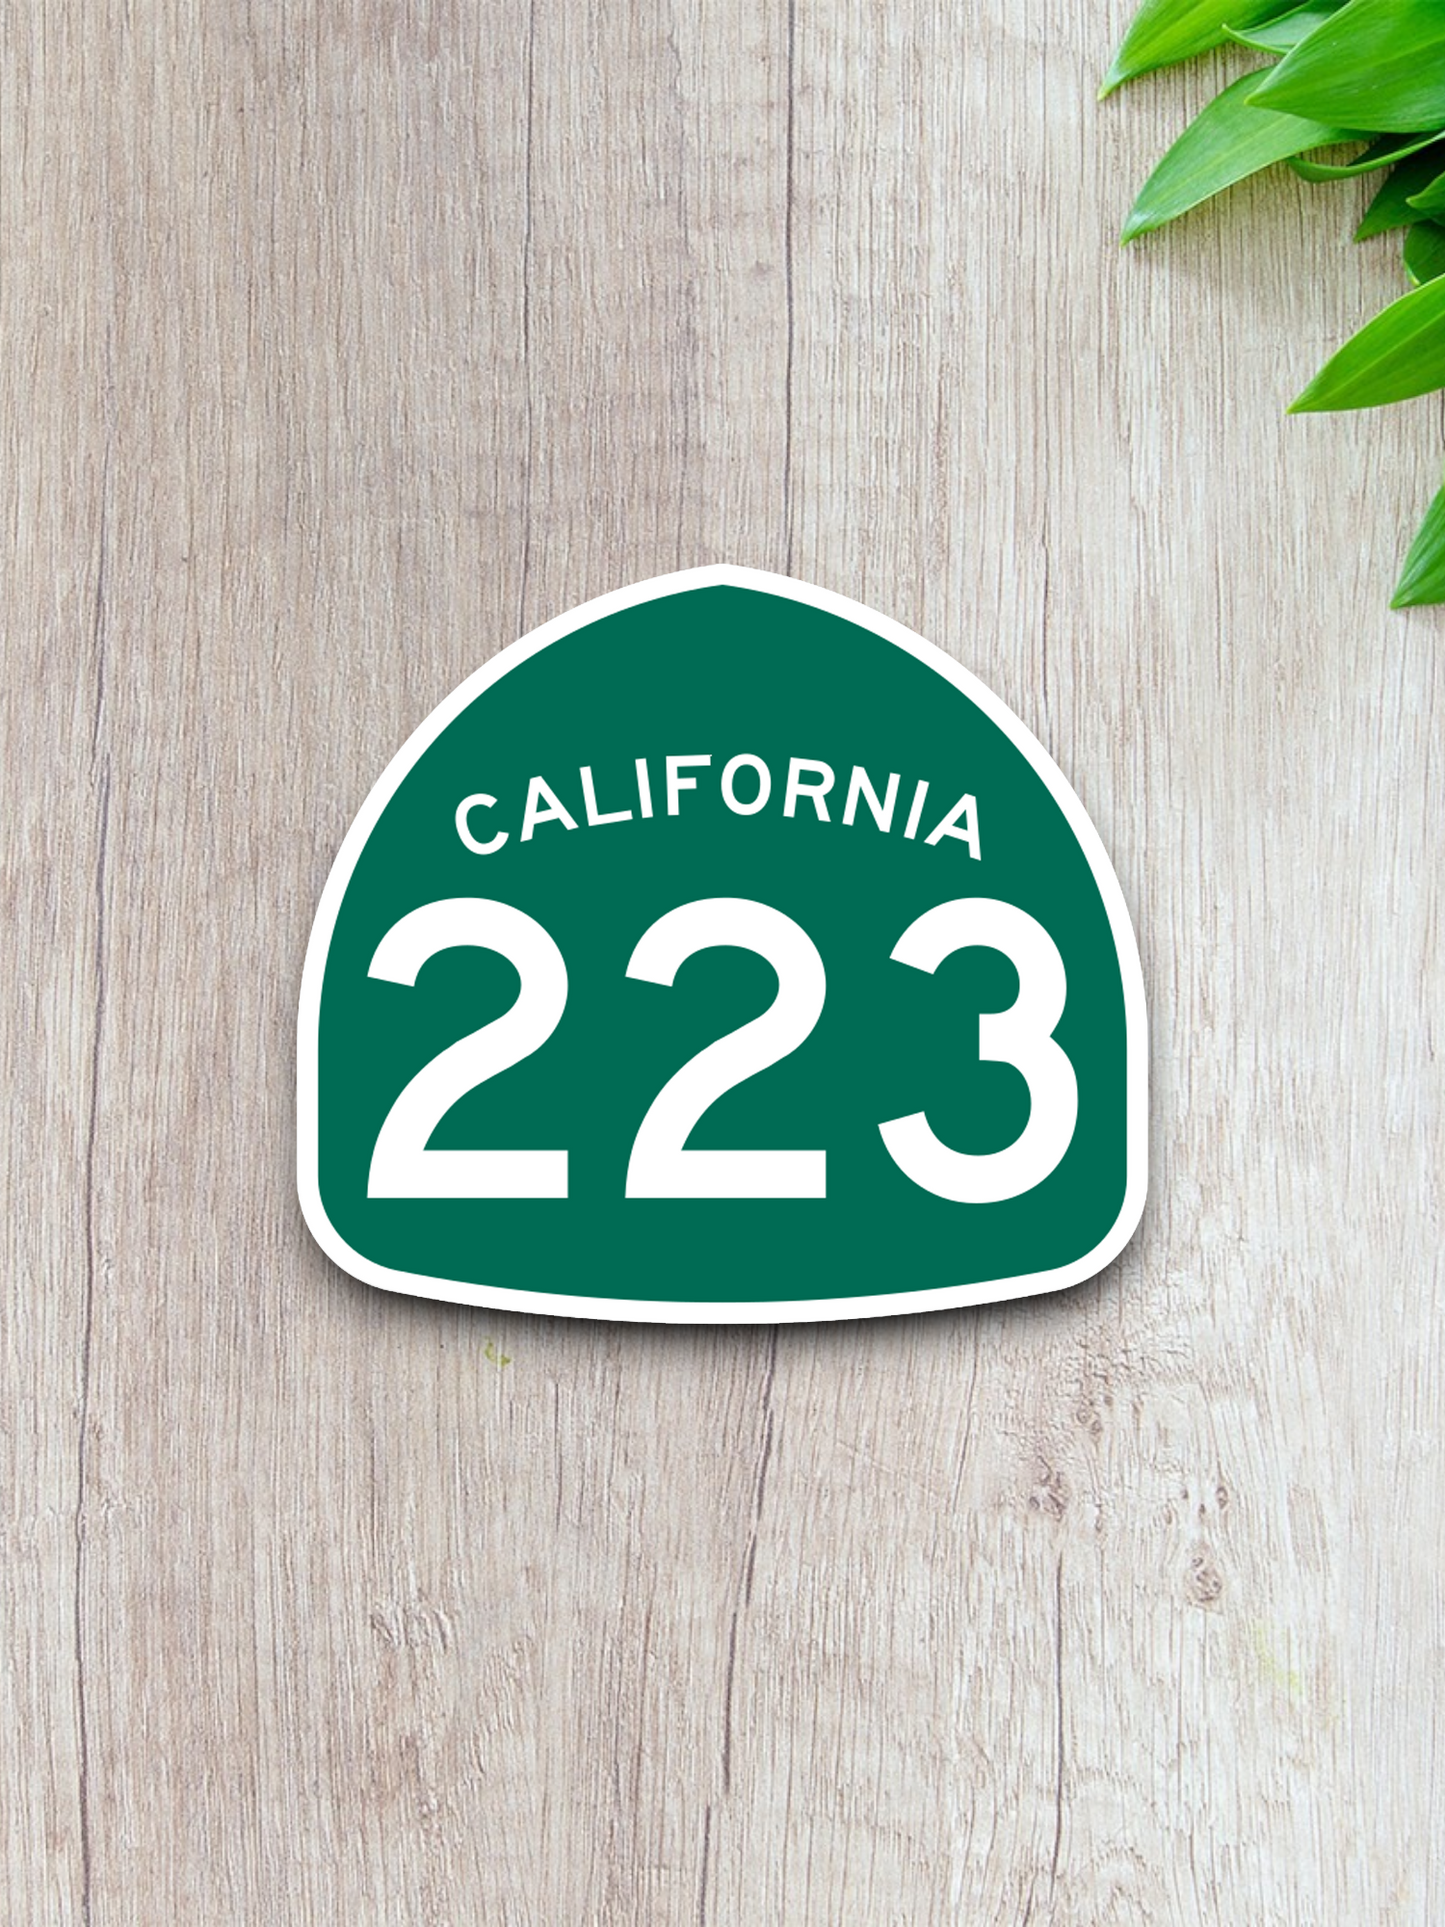 California State Route 223 Road Sign Sticker